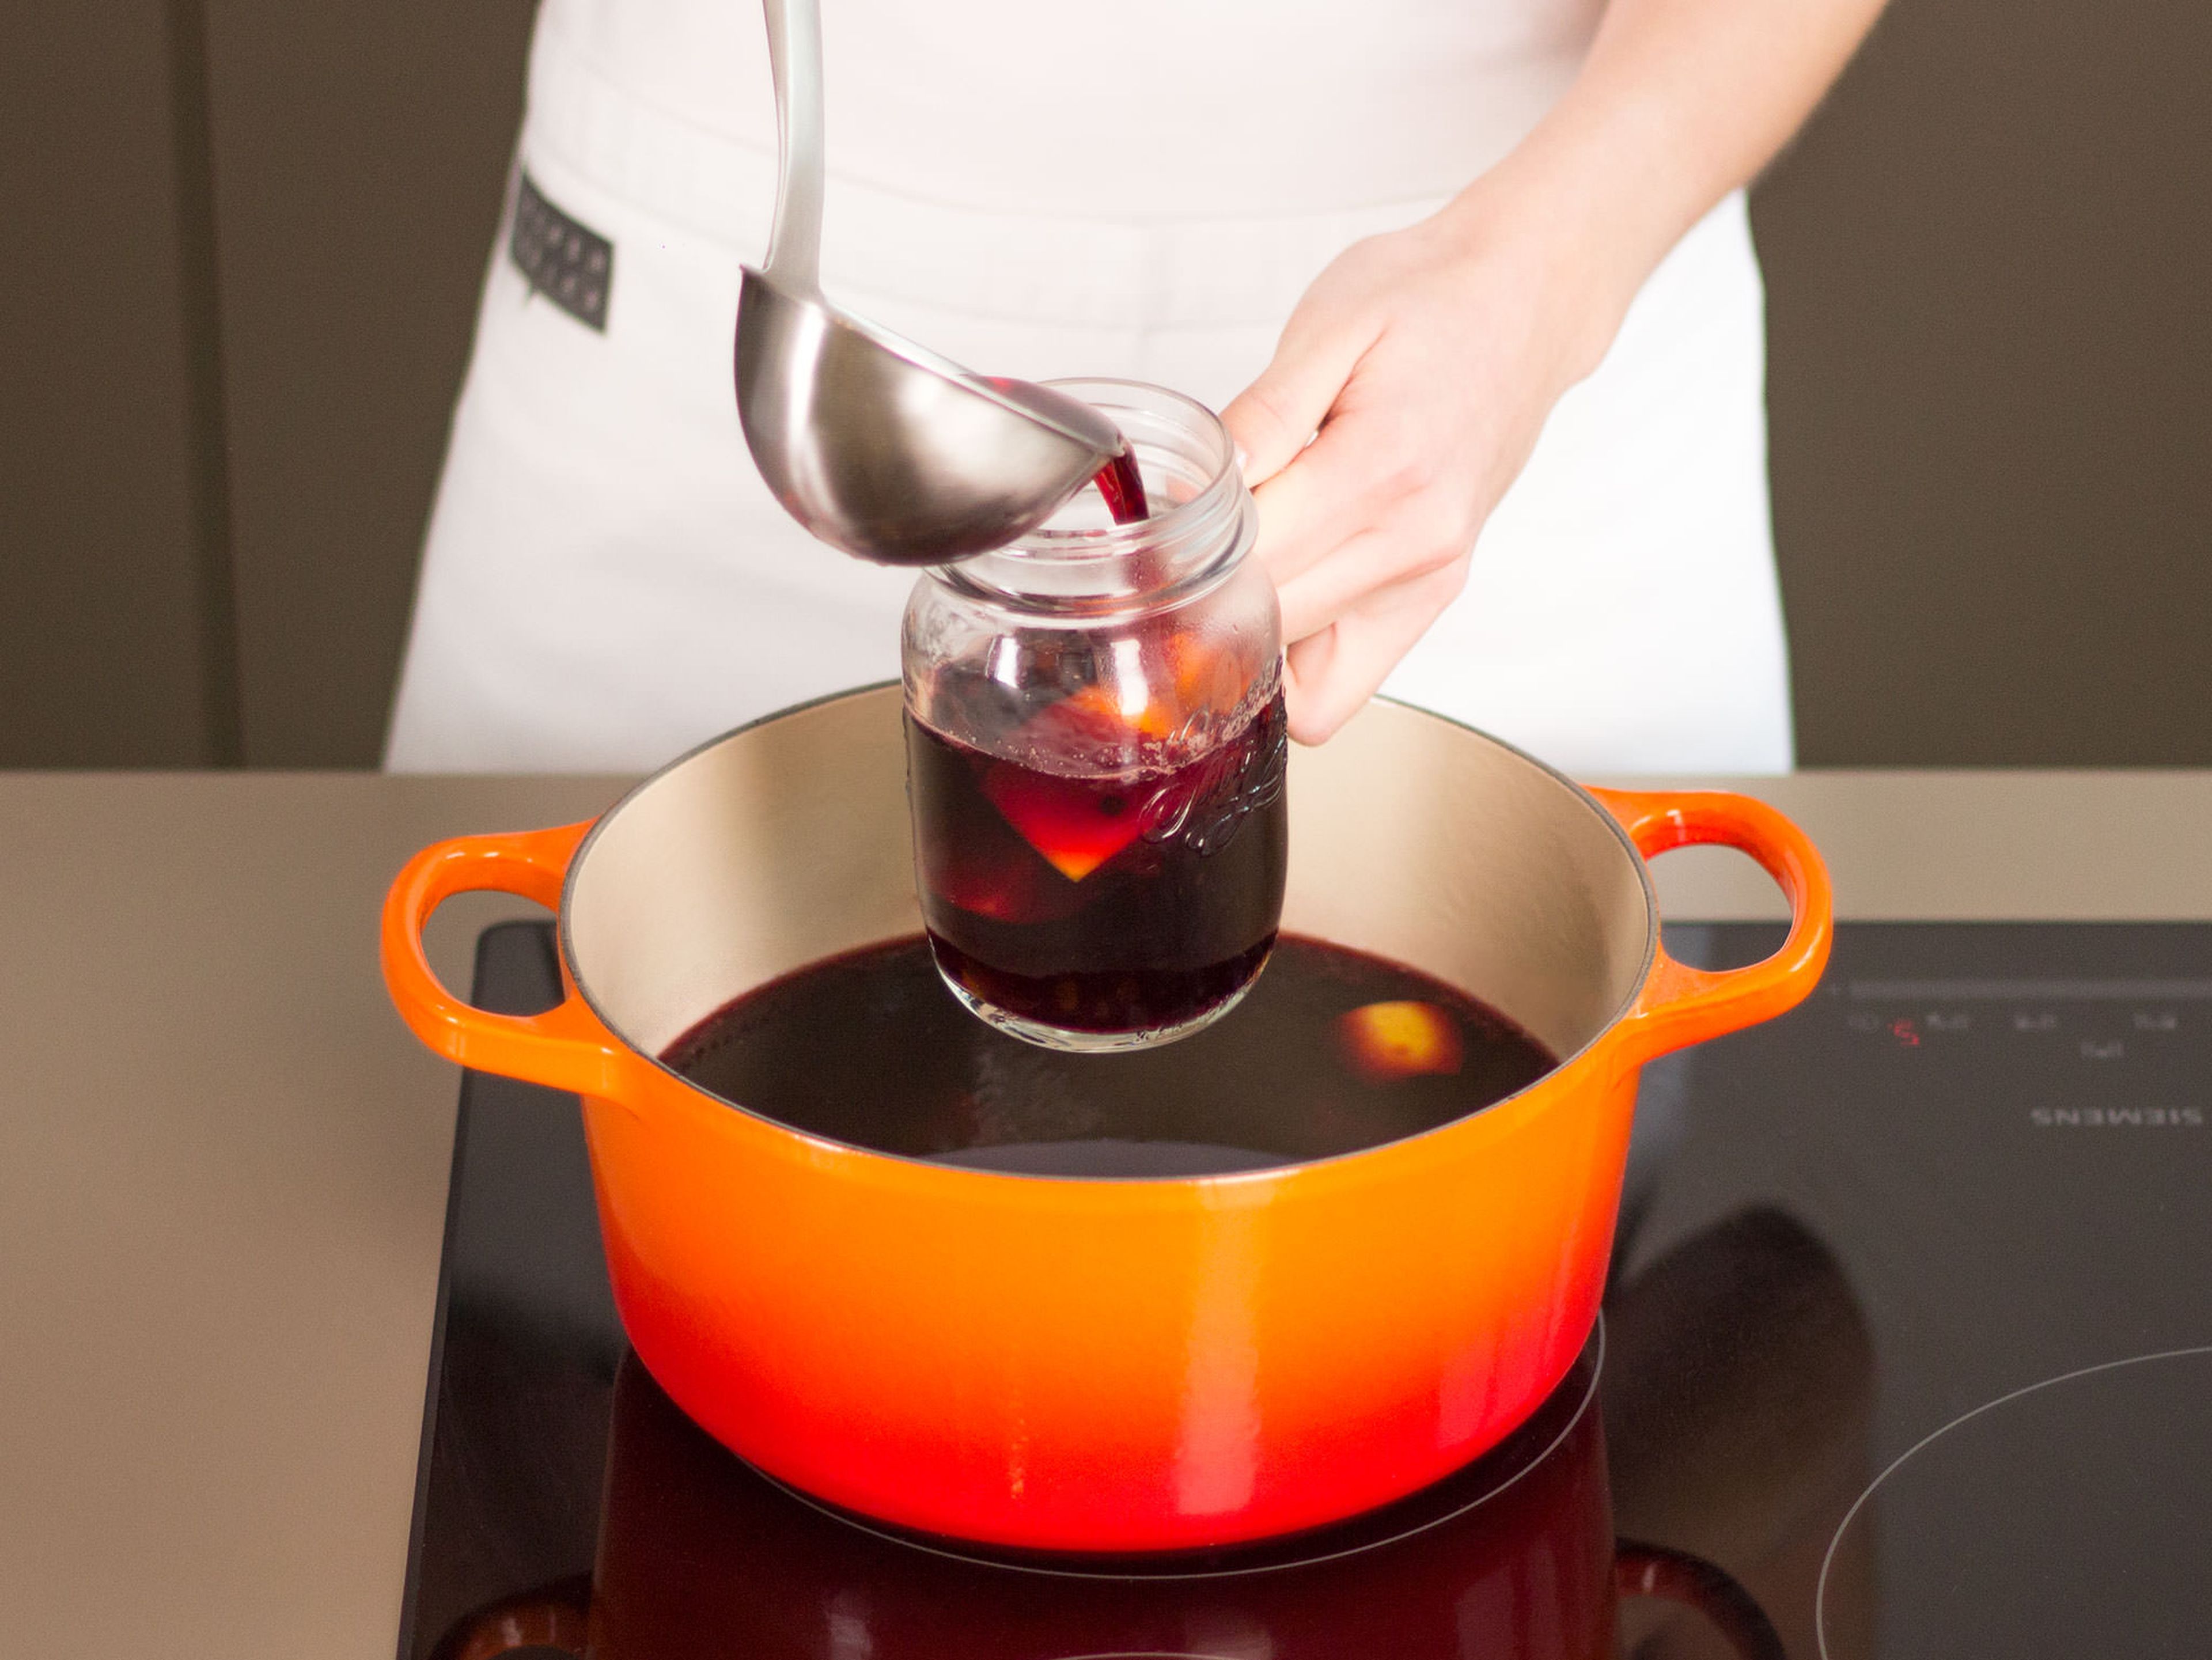 Remove spices from mulled wine if desired. Serve hot.